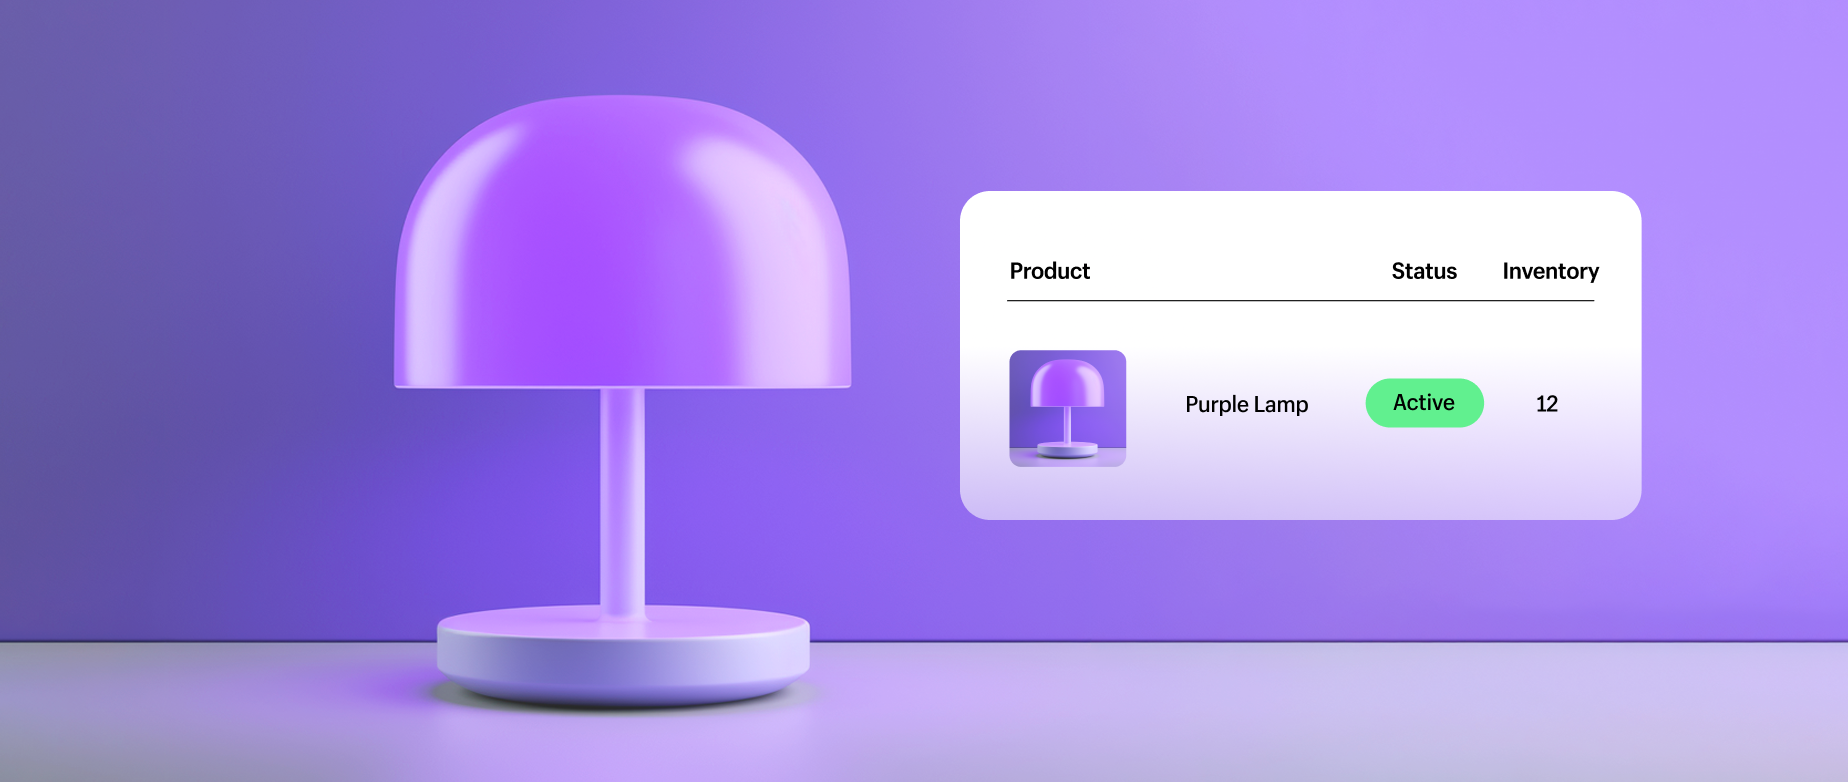 a purple lamp and a screenshot of inventory information about the lamp: inventory visibility